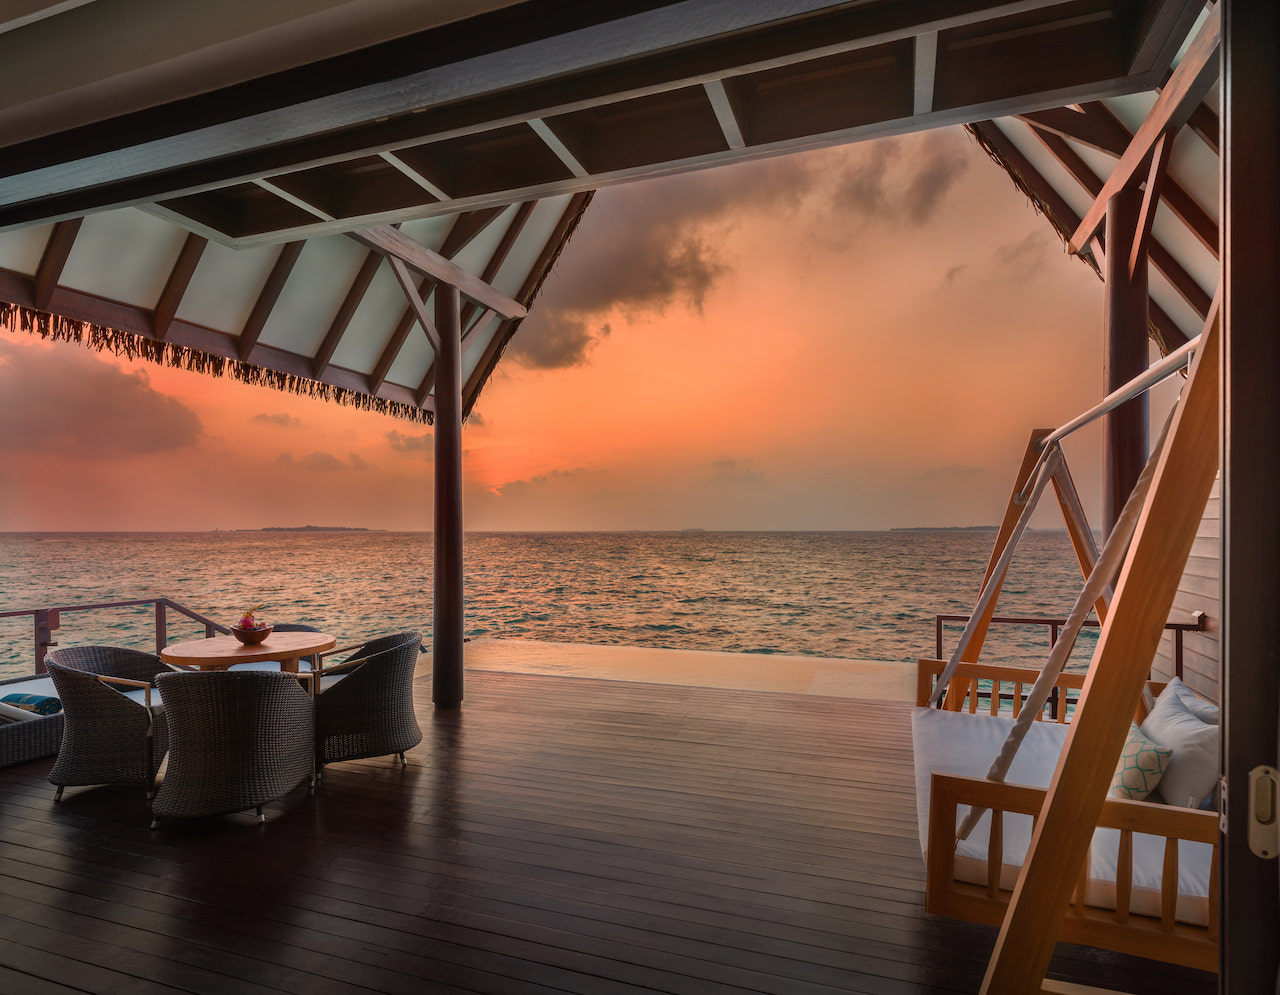 Heritance Aarah in the Maldives has unveiled its latest concept, the resort-within-a-resort Ocean Suites Wing.